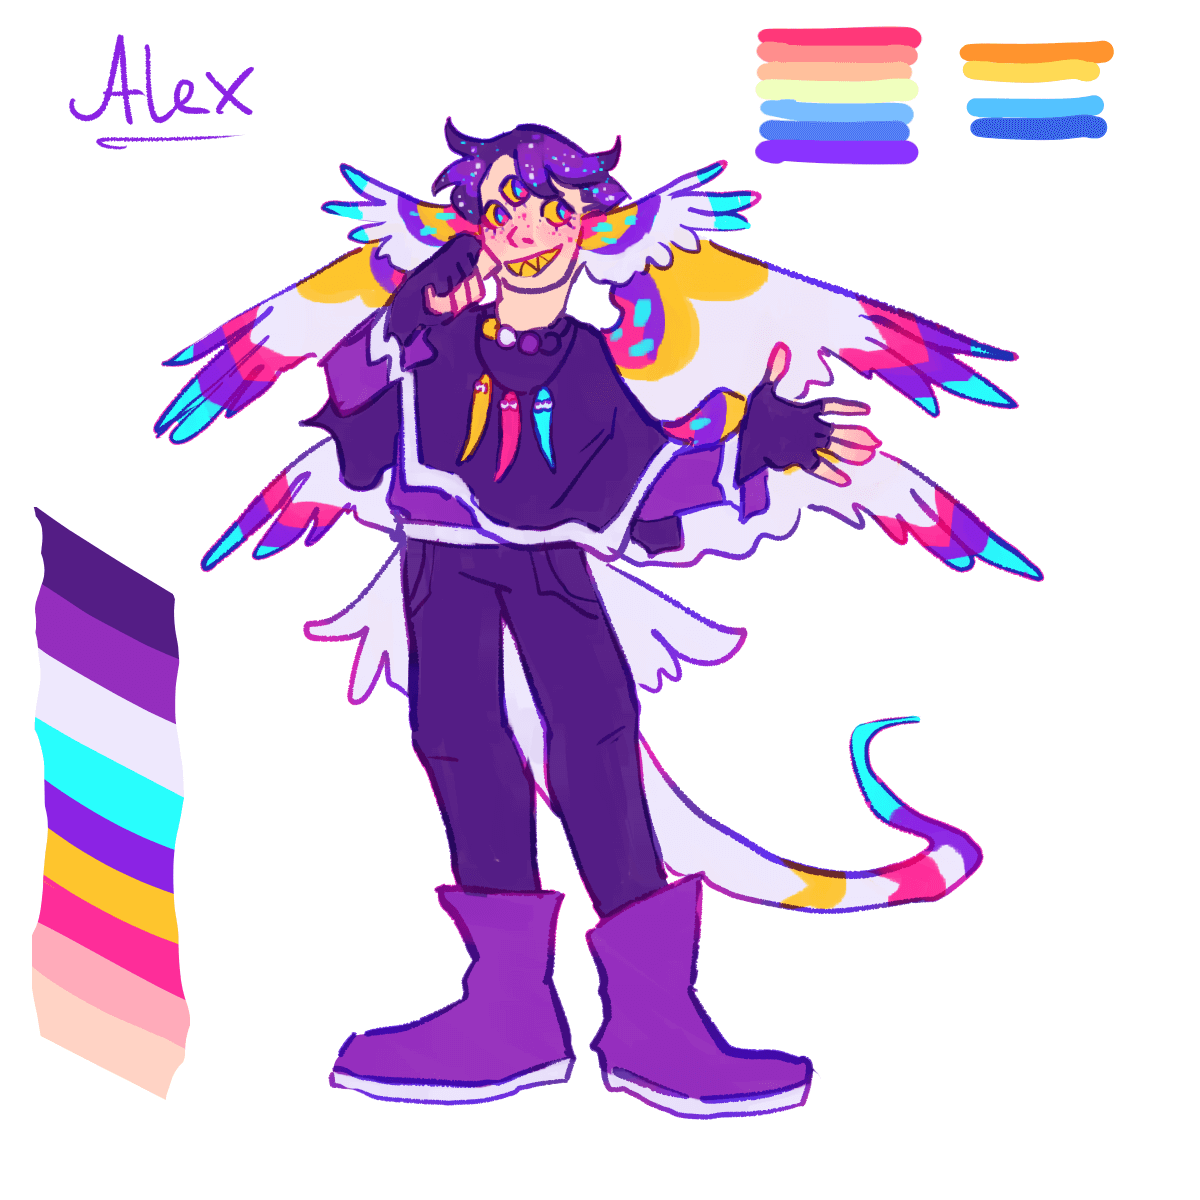 a humanoid being with three eyes, wing ears, two pairs of wings on the back, and a tail. their wings are colorful, their clothing is purple.